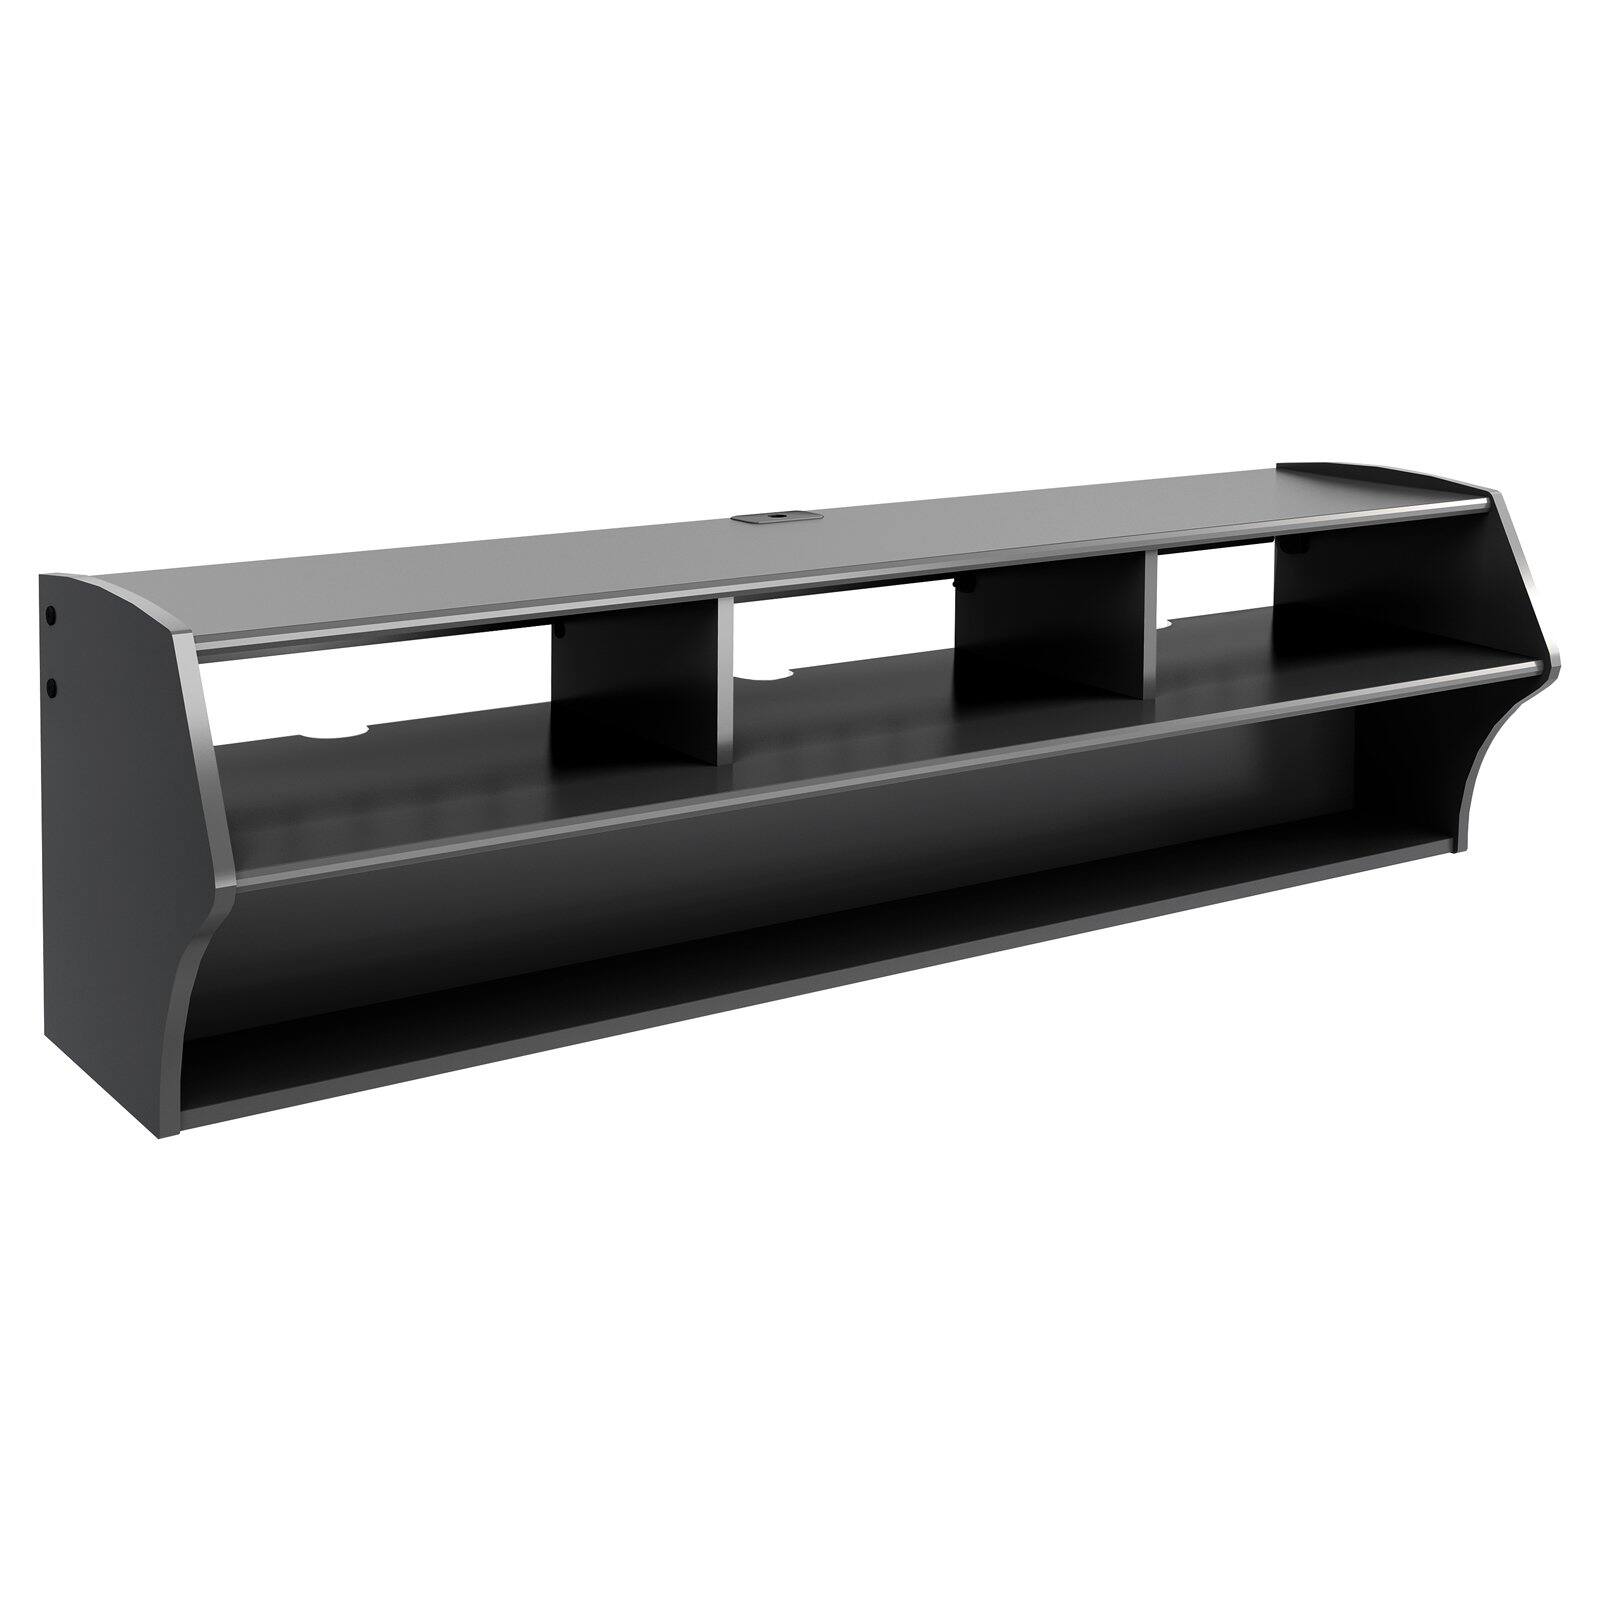 Altus Plus Floating TV Stand for TVs up to 60" - image 1 of 10